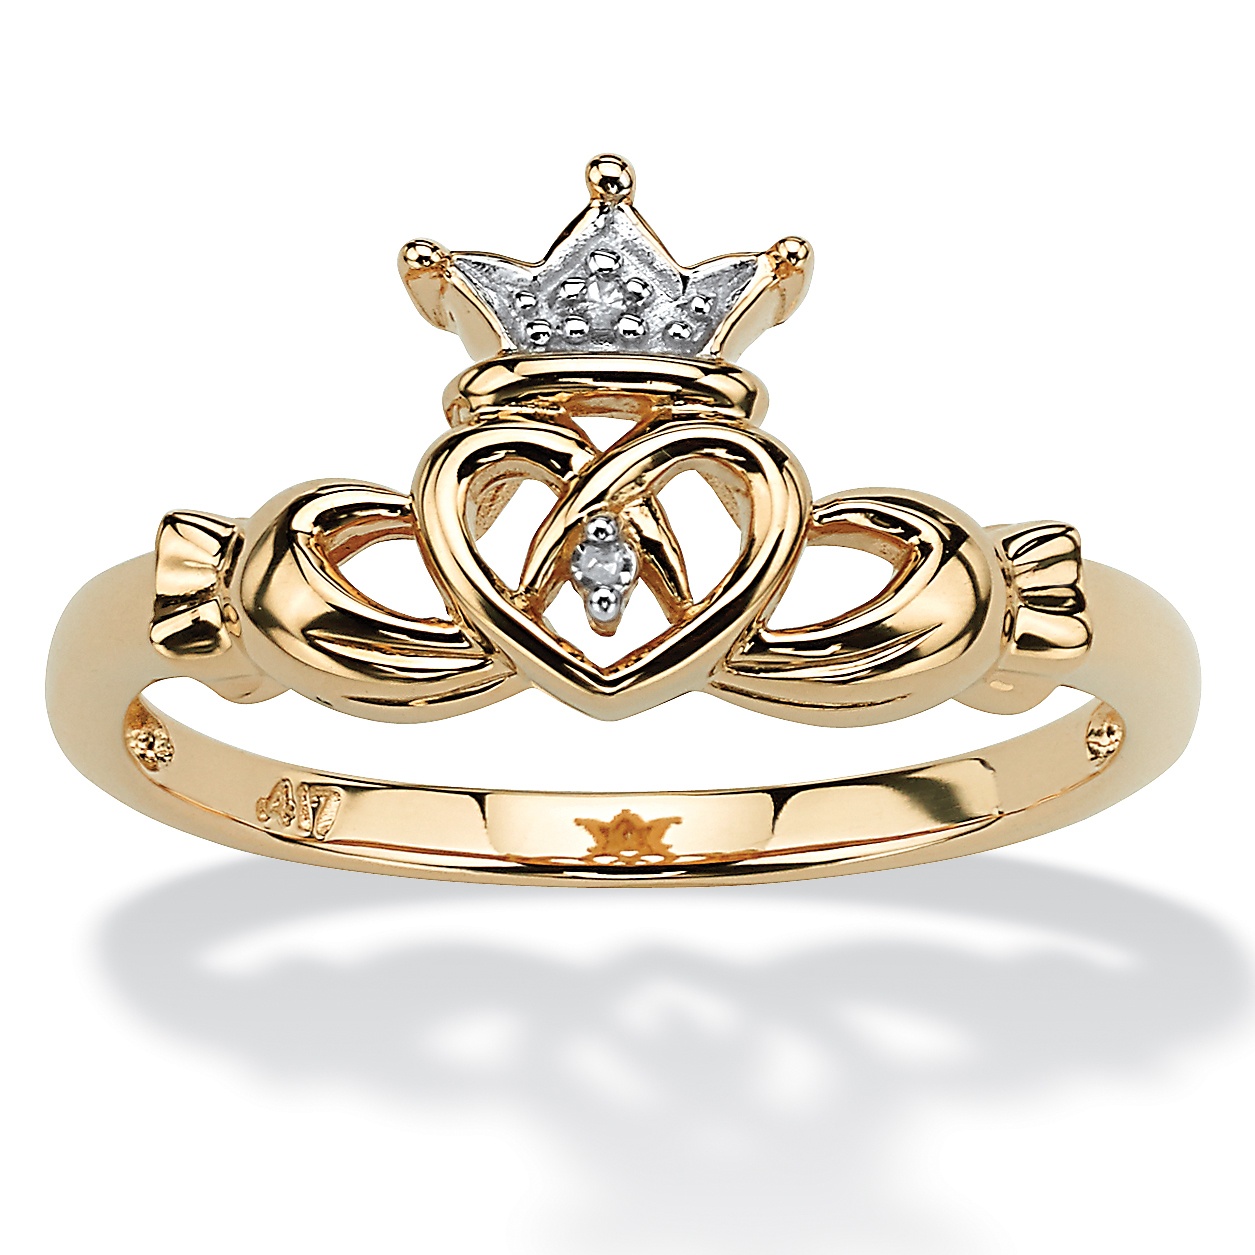  ring. Wedding ring tattoo designs pictures 10k Gold Claddagh Ring title=